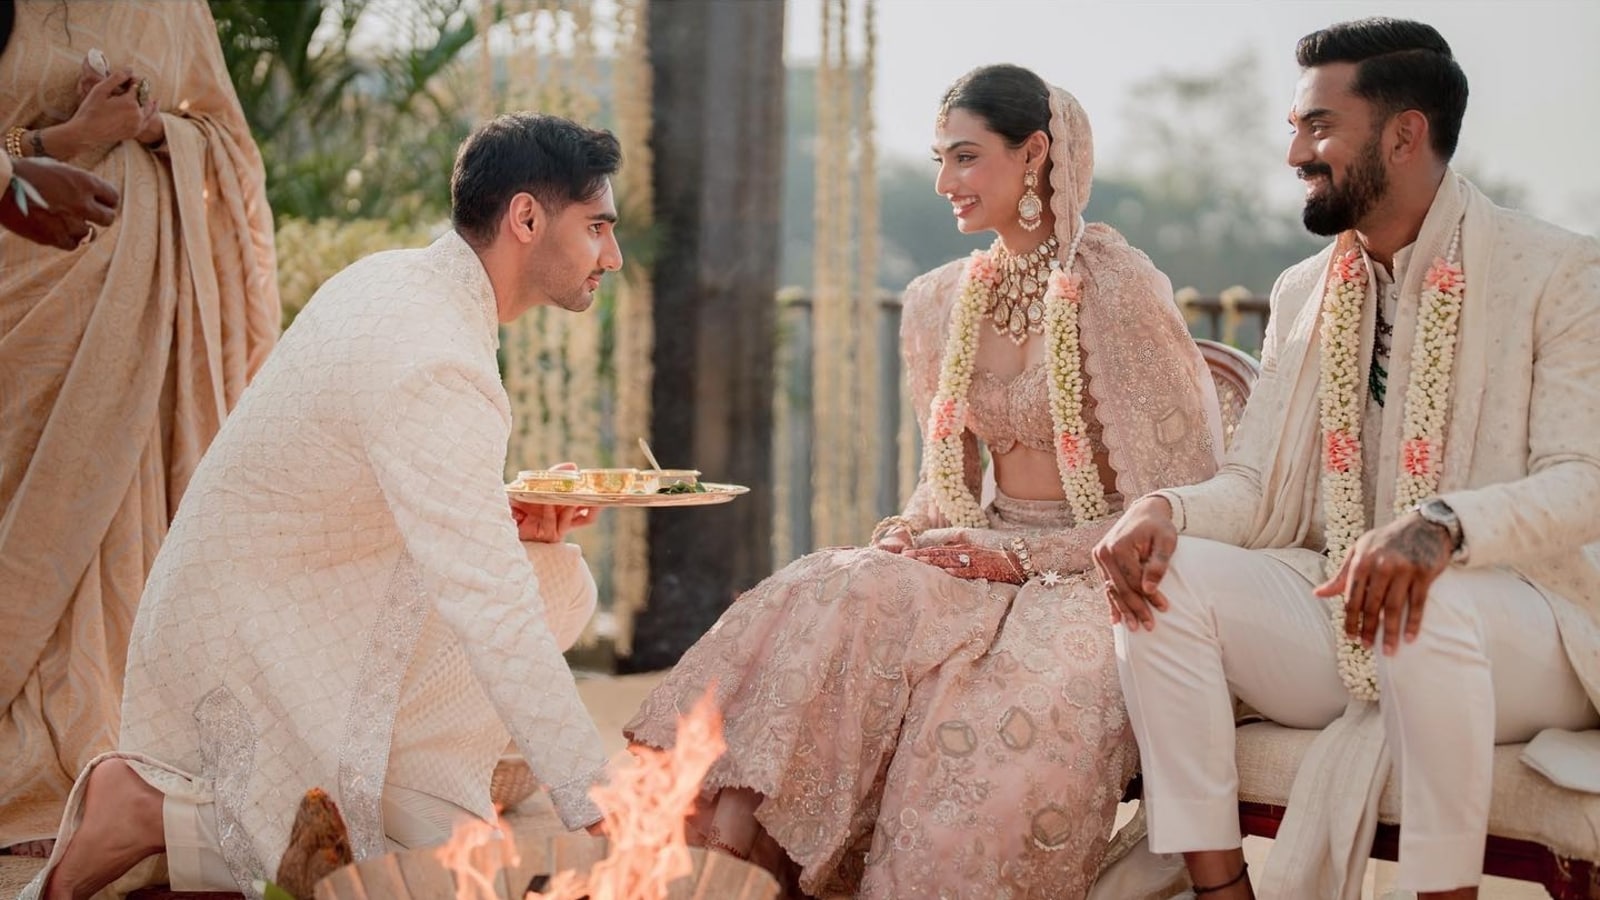 Athiya Shetty and KL Rahul react as Ahan Shetty shares unseen pics from wedding ceremony. See post here